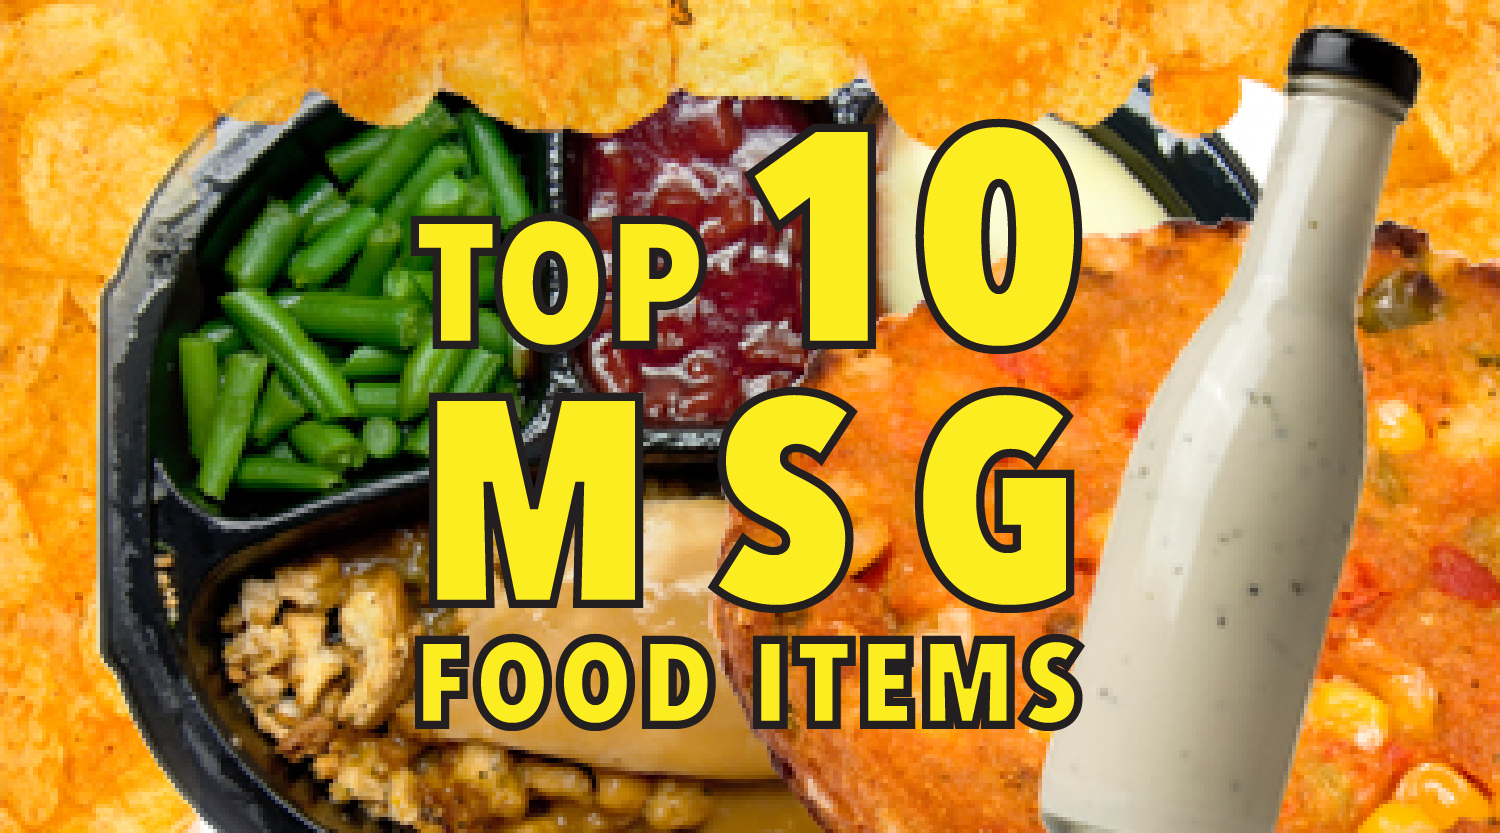 Top 10 MSG food items